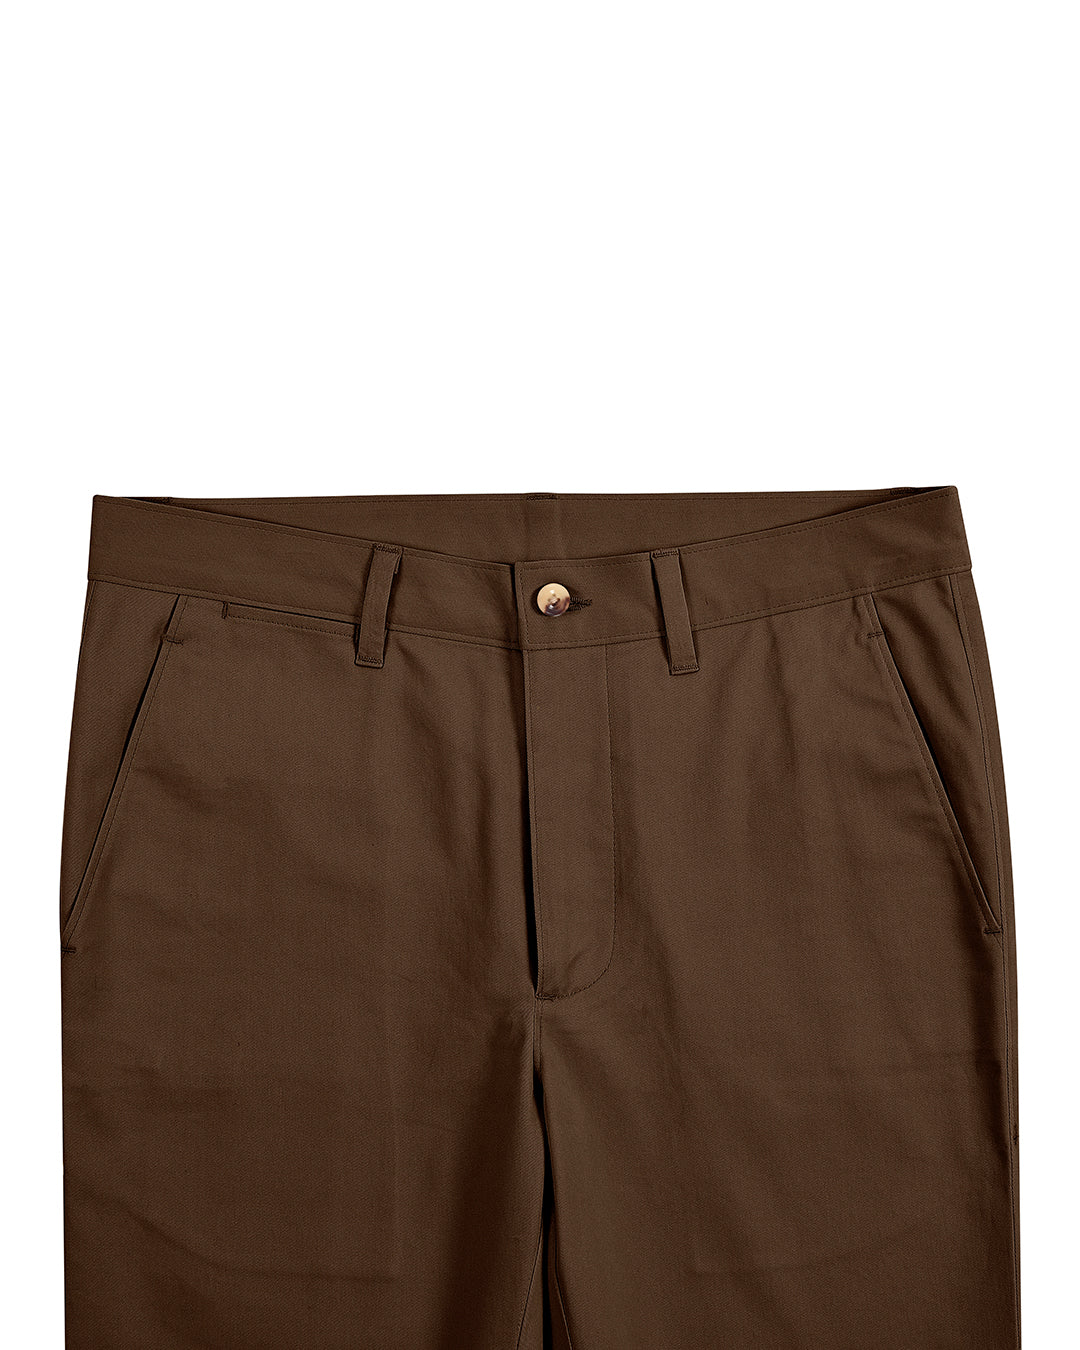 Front view of custom Genoa Chino pants for men by Luxire in coffee brown